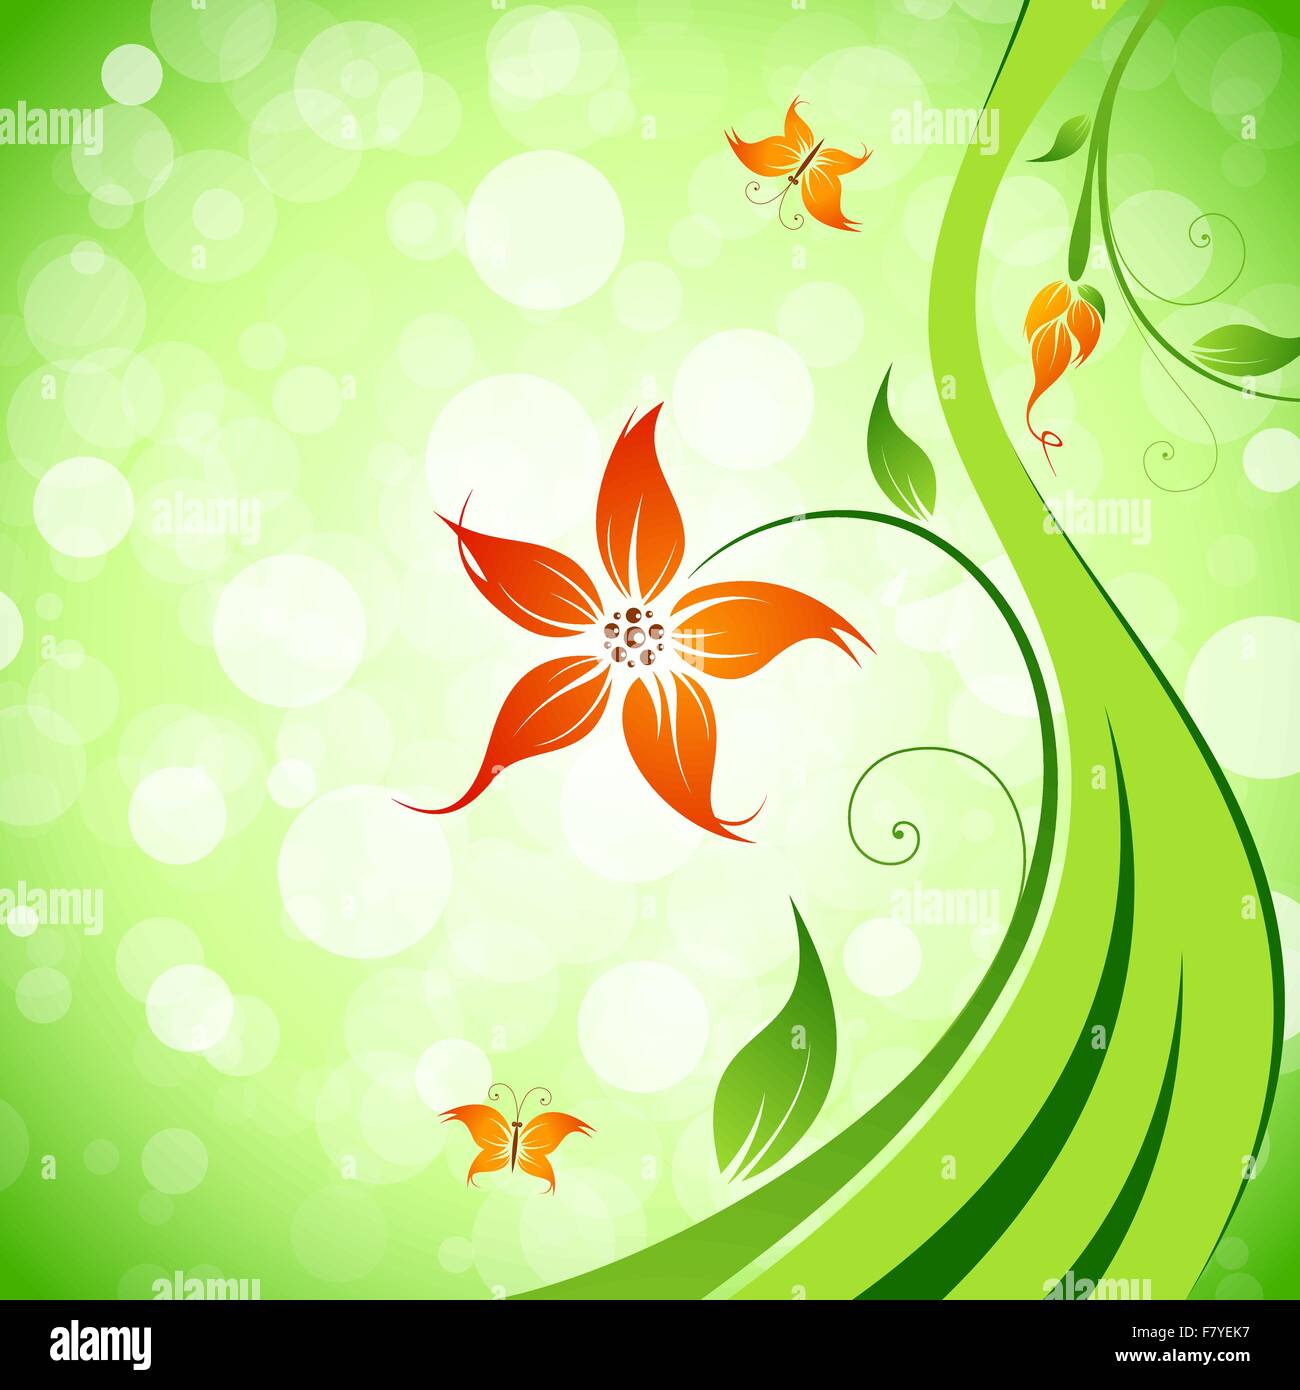 Abstract Flower Background Stock Vector